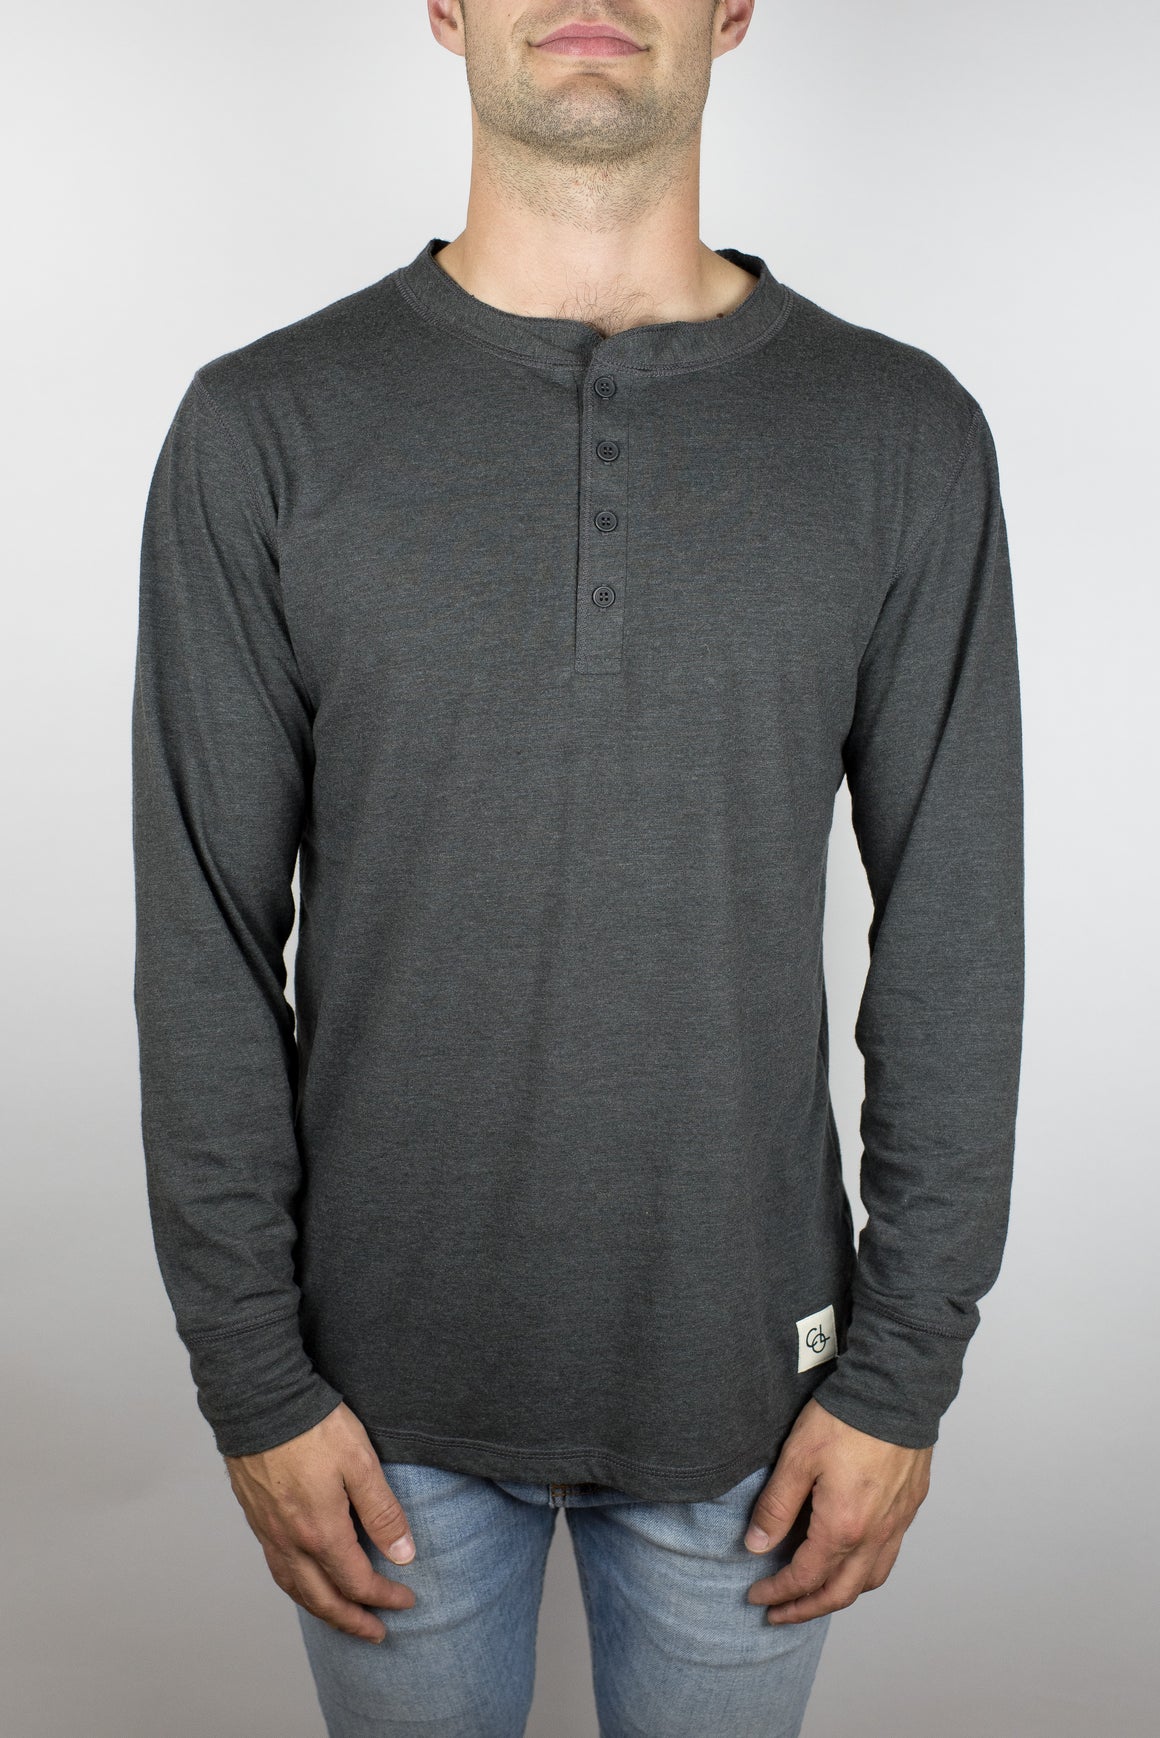 The Ignition Long Sleeve Henley in Heather Grey